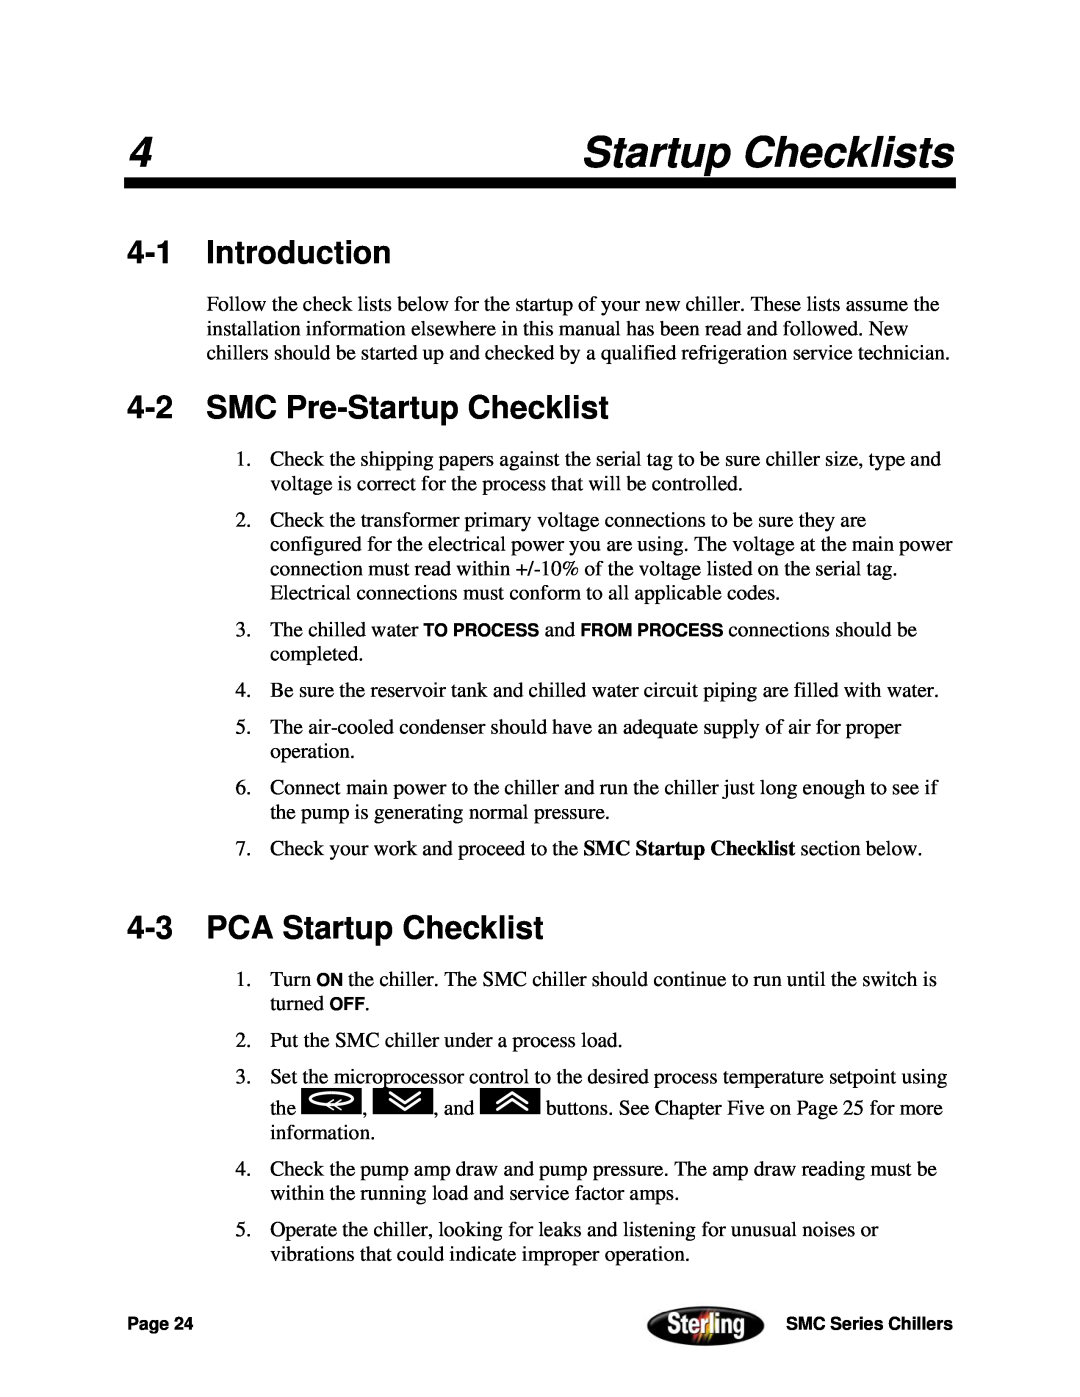 Sterling Power Products 30F to 65F installation manual Startup Checklists, 4-1Introduction, 4-2SMC Pre-StartupChecklist 